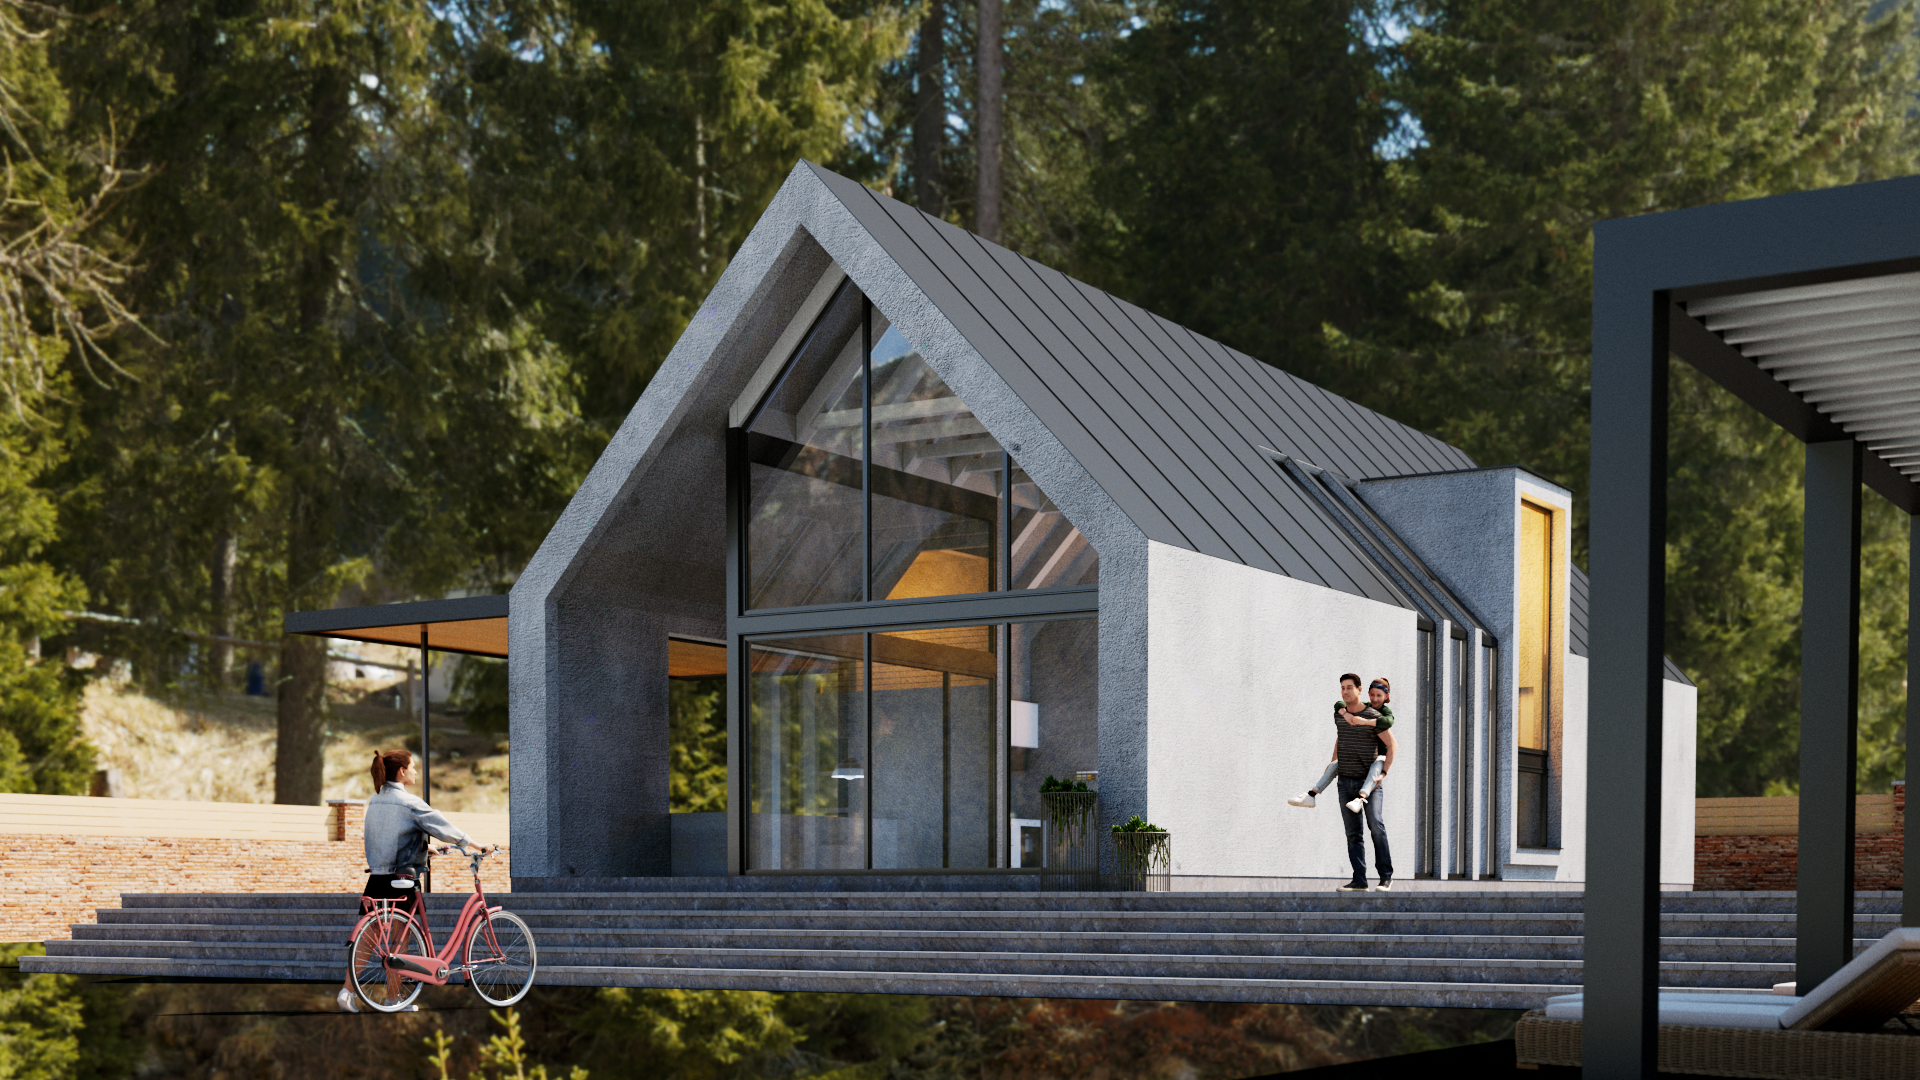 How to Use V-Ray for SketchUp: Beginner’s Guide